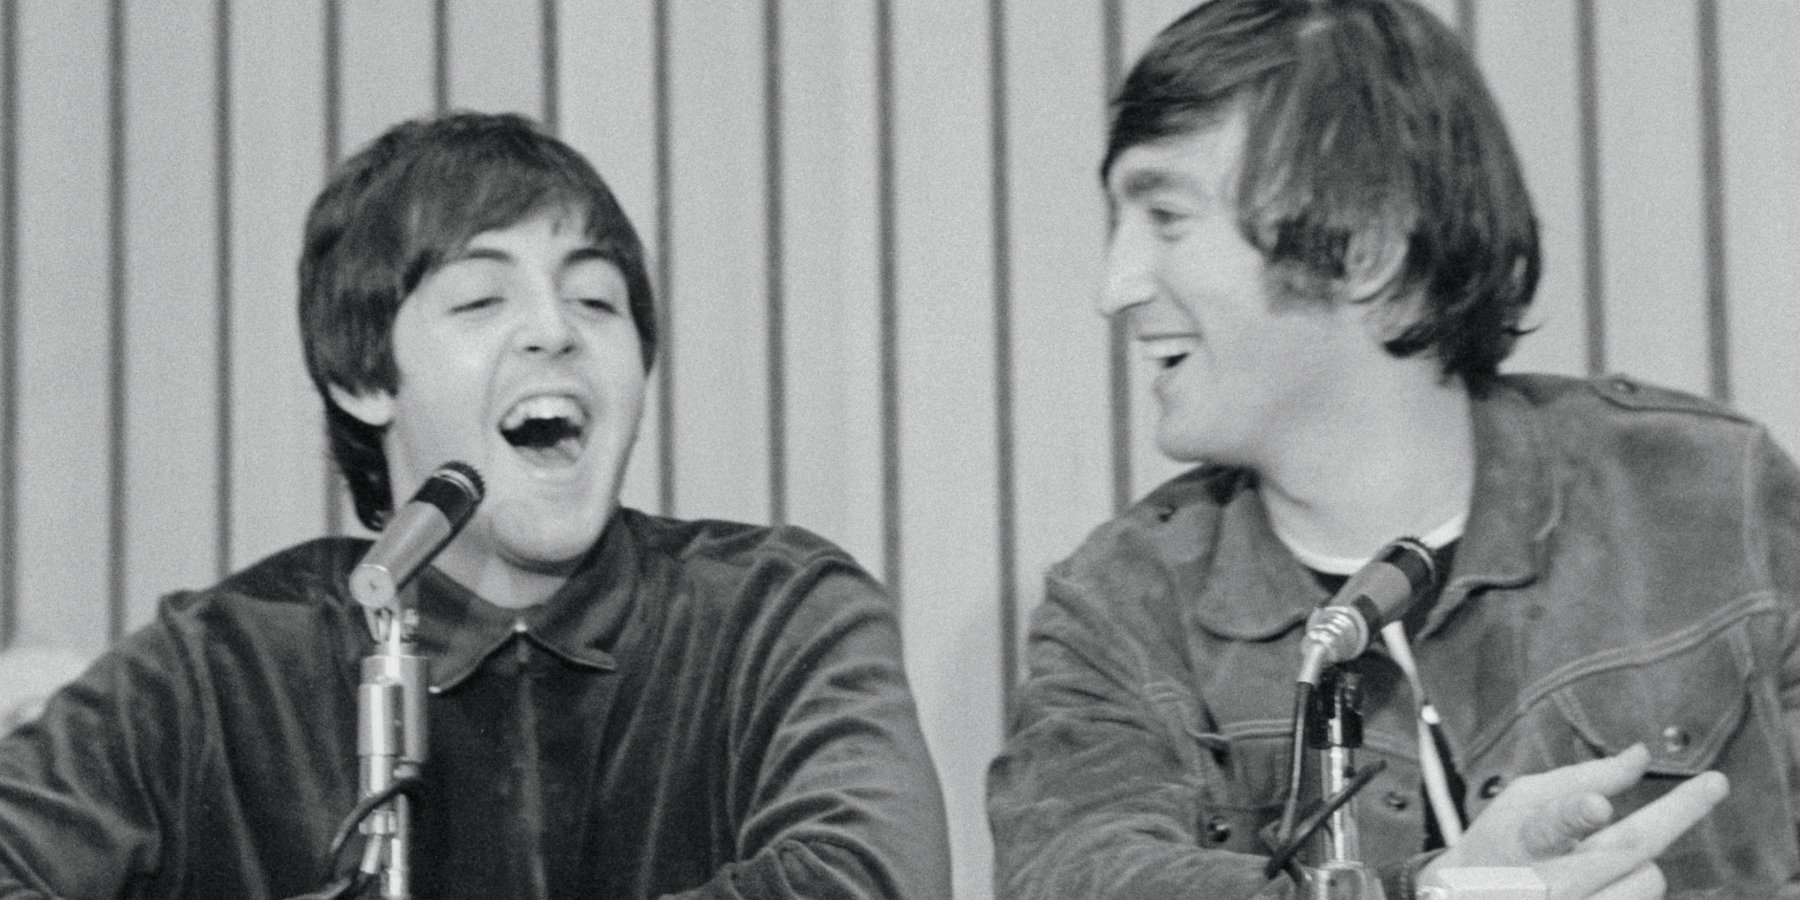 Paul McCartney and John Lennon smiles as Paul McCartney speaks at press conference held after Beatles performance in Portland.